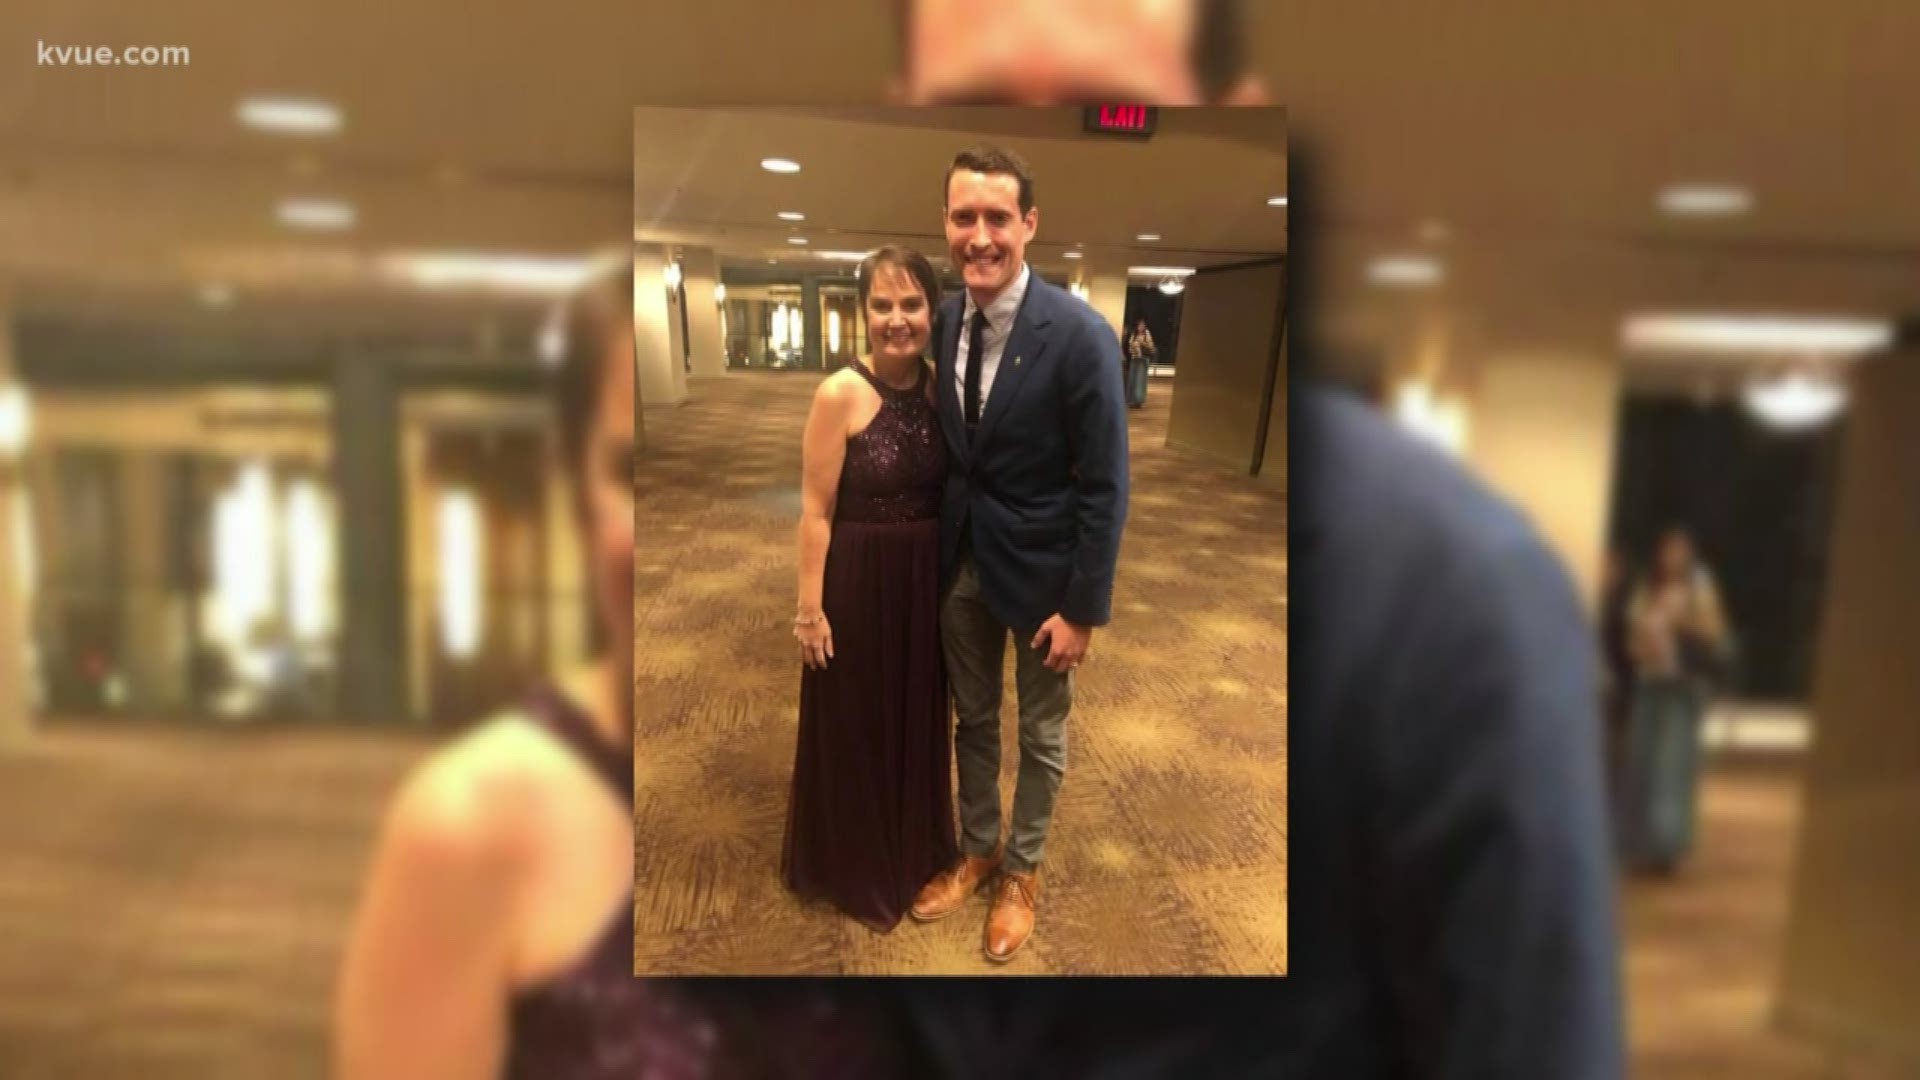 An Austin bone marrow donor met the South Carolina woman who received his life-changing donation. A reunion five years in the making.